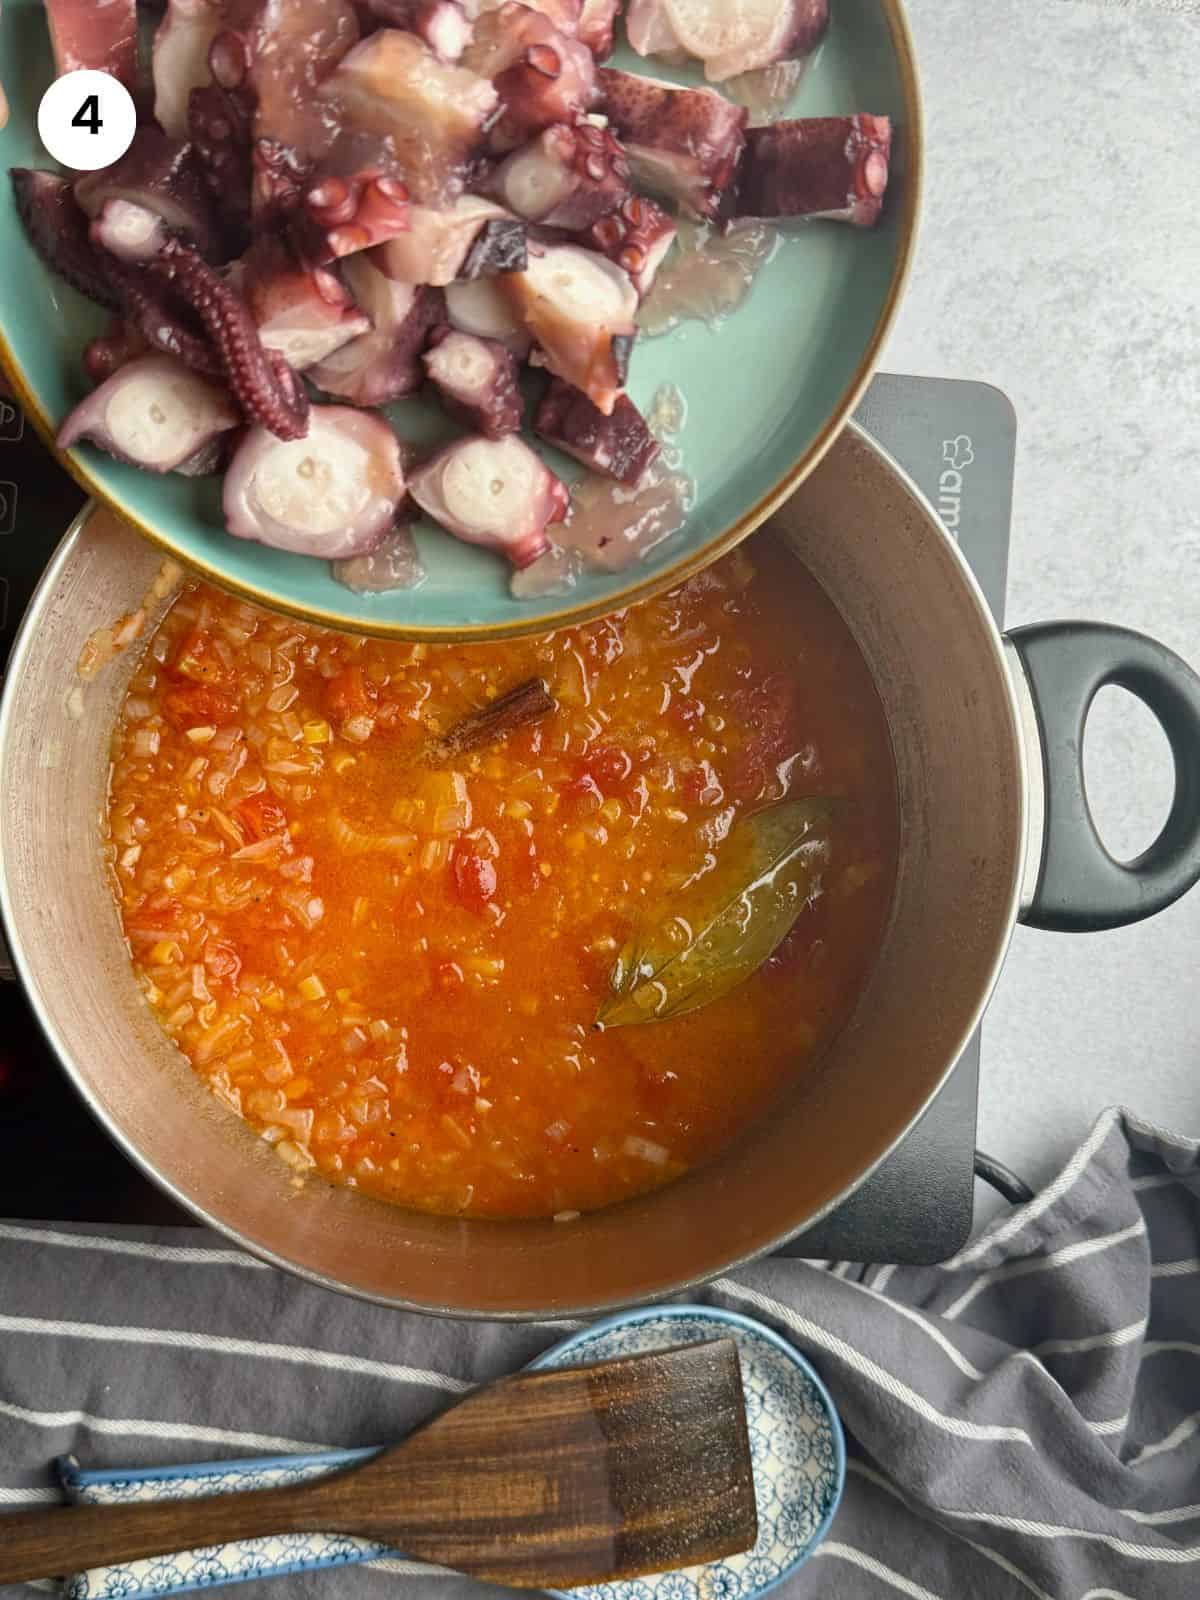 Adding the pasta and octopus to the pot.